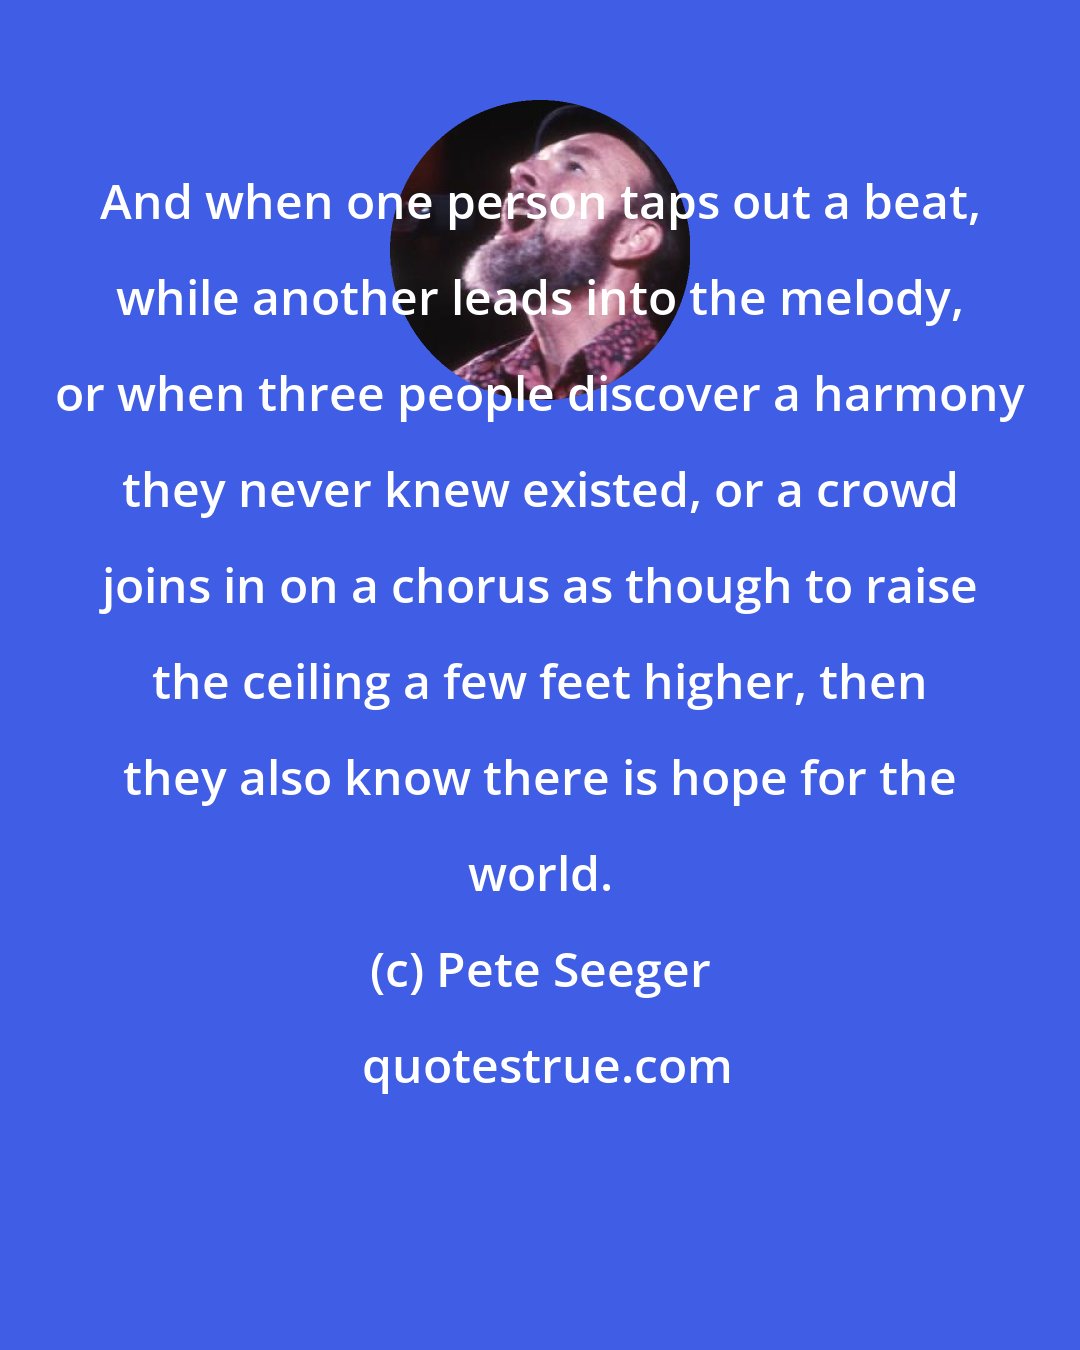 Pete Seeger: And when one person taps out a beat, while another leads into the melody, or when three people discover a harmony they never knew existed, or a crowd joins in on a chorus as though to raise the ceiling a few feet higher, then they also know there is hope for the world.